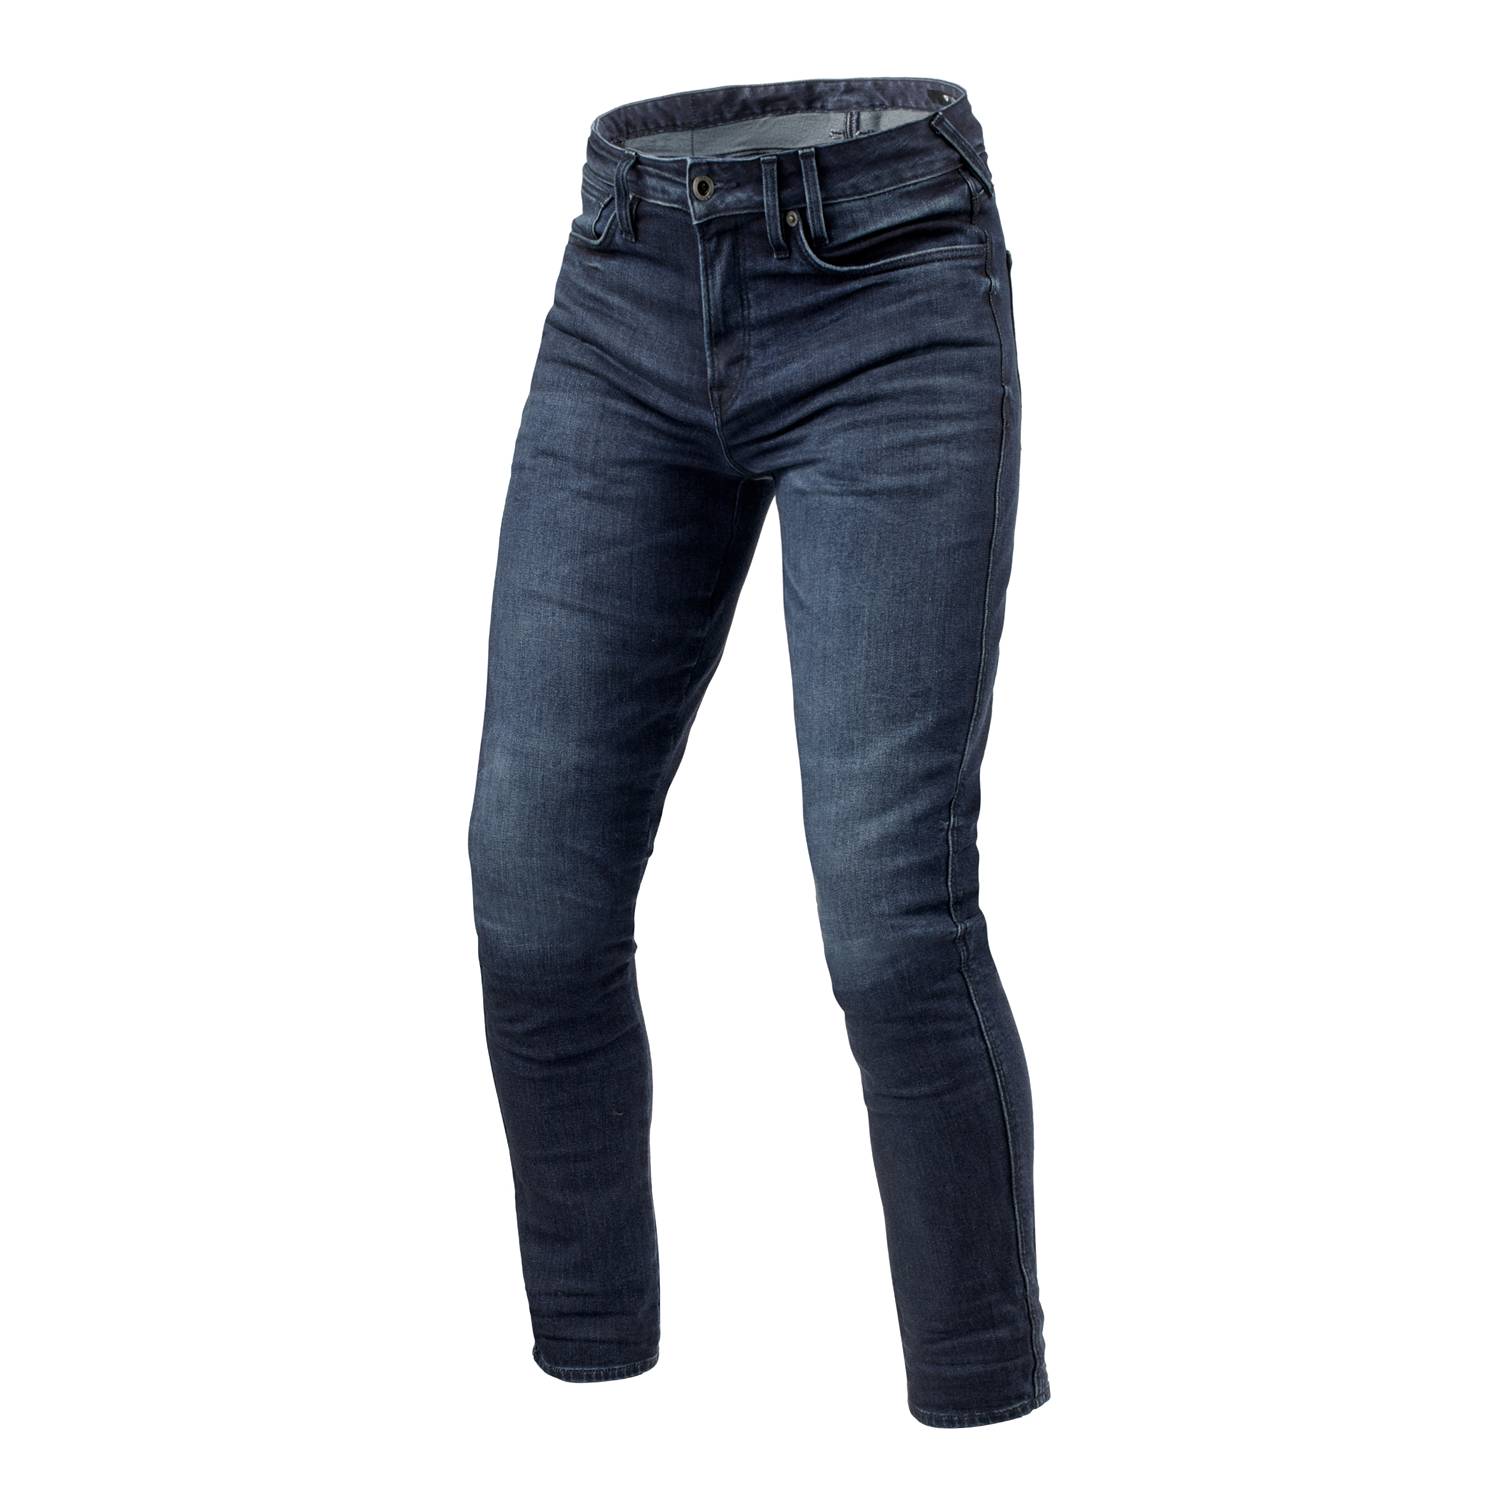 Image of REV'IT! Jeans Carlin SK Dark Blue Used L32 Motorcycle Jeans Size L32/W34 ID 8700001376501